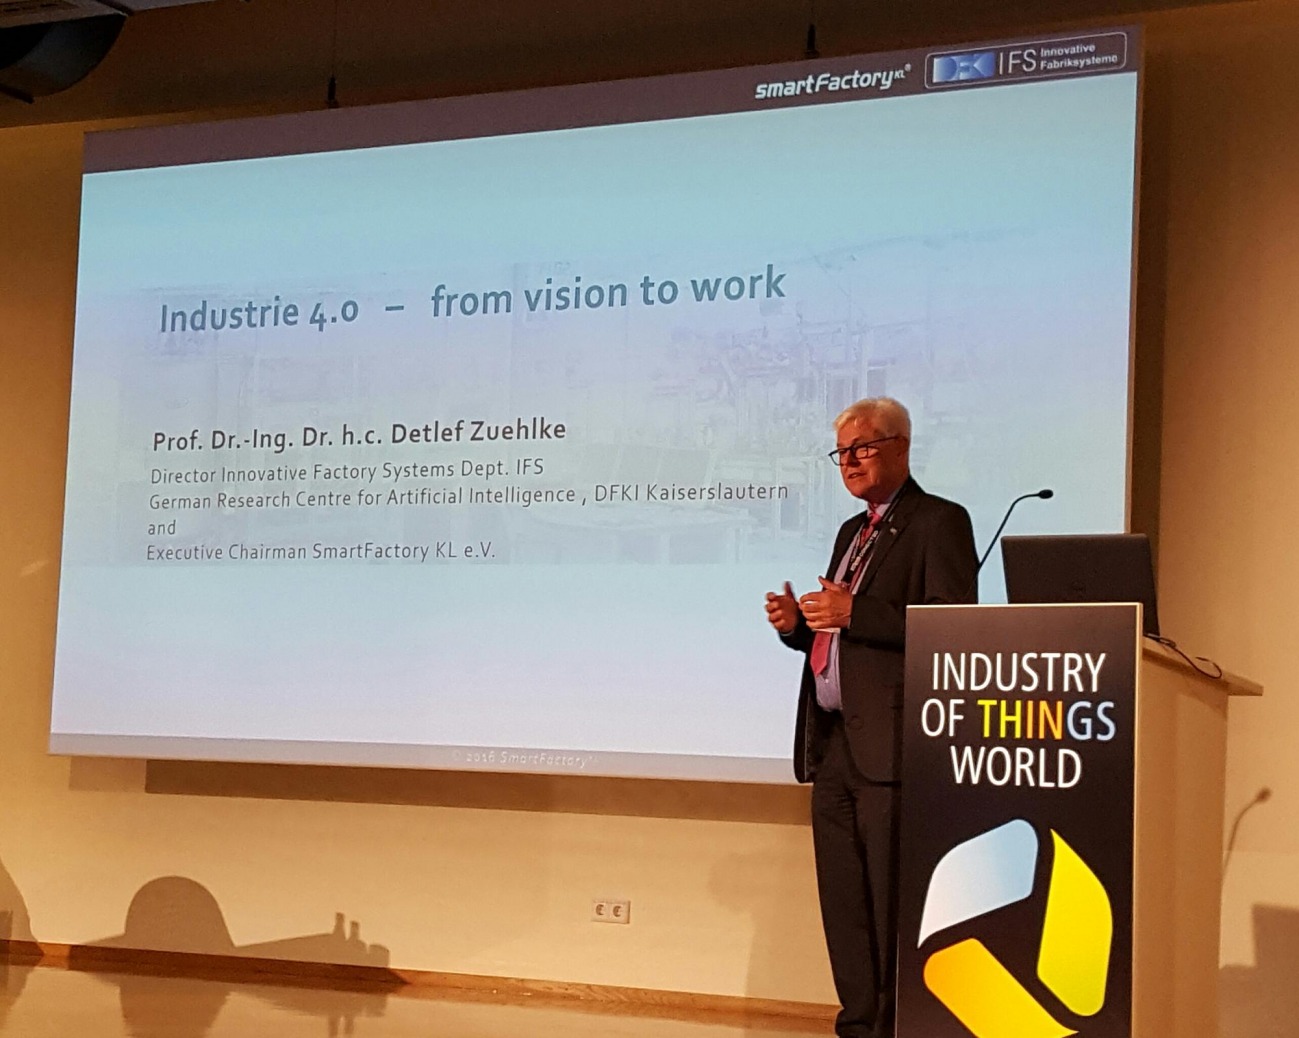 2. Industry of Things World Conference in Berlin